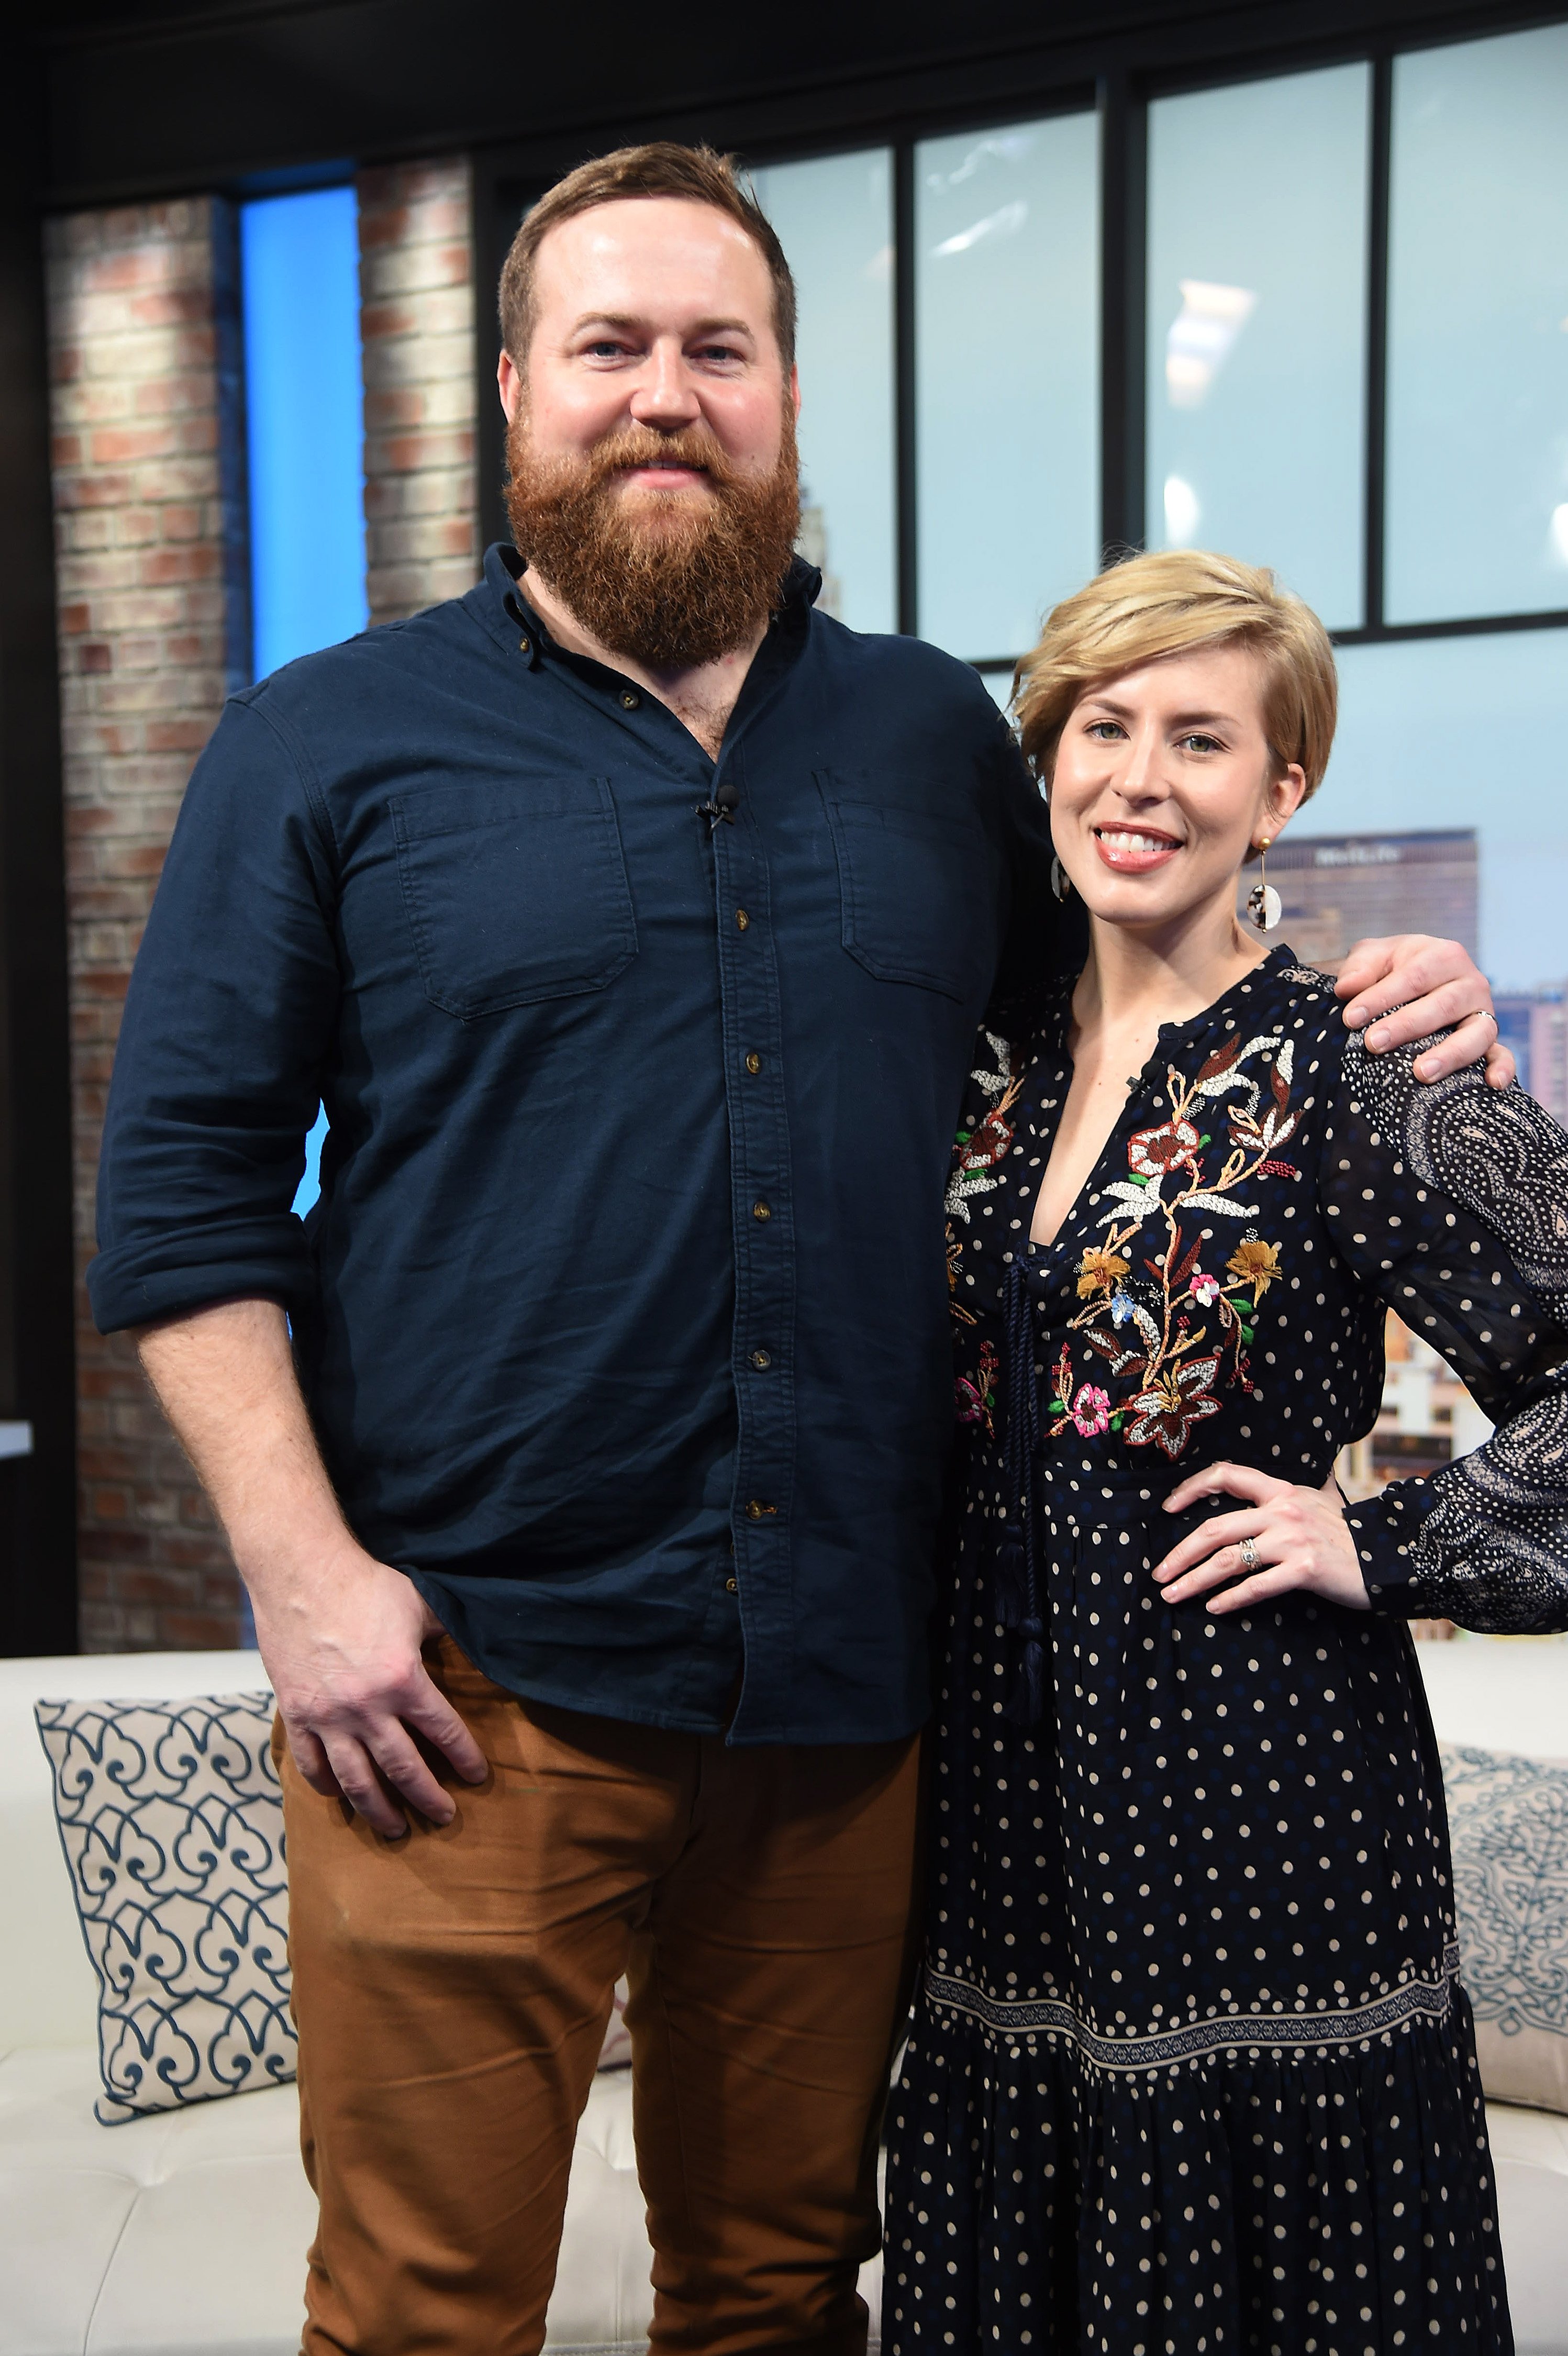 The HGTV "Home Town" stars Ben Napier and Erin Napier pay a visit to People Now on January 8, 2020, in New York | Source: Getty Images